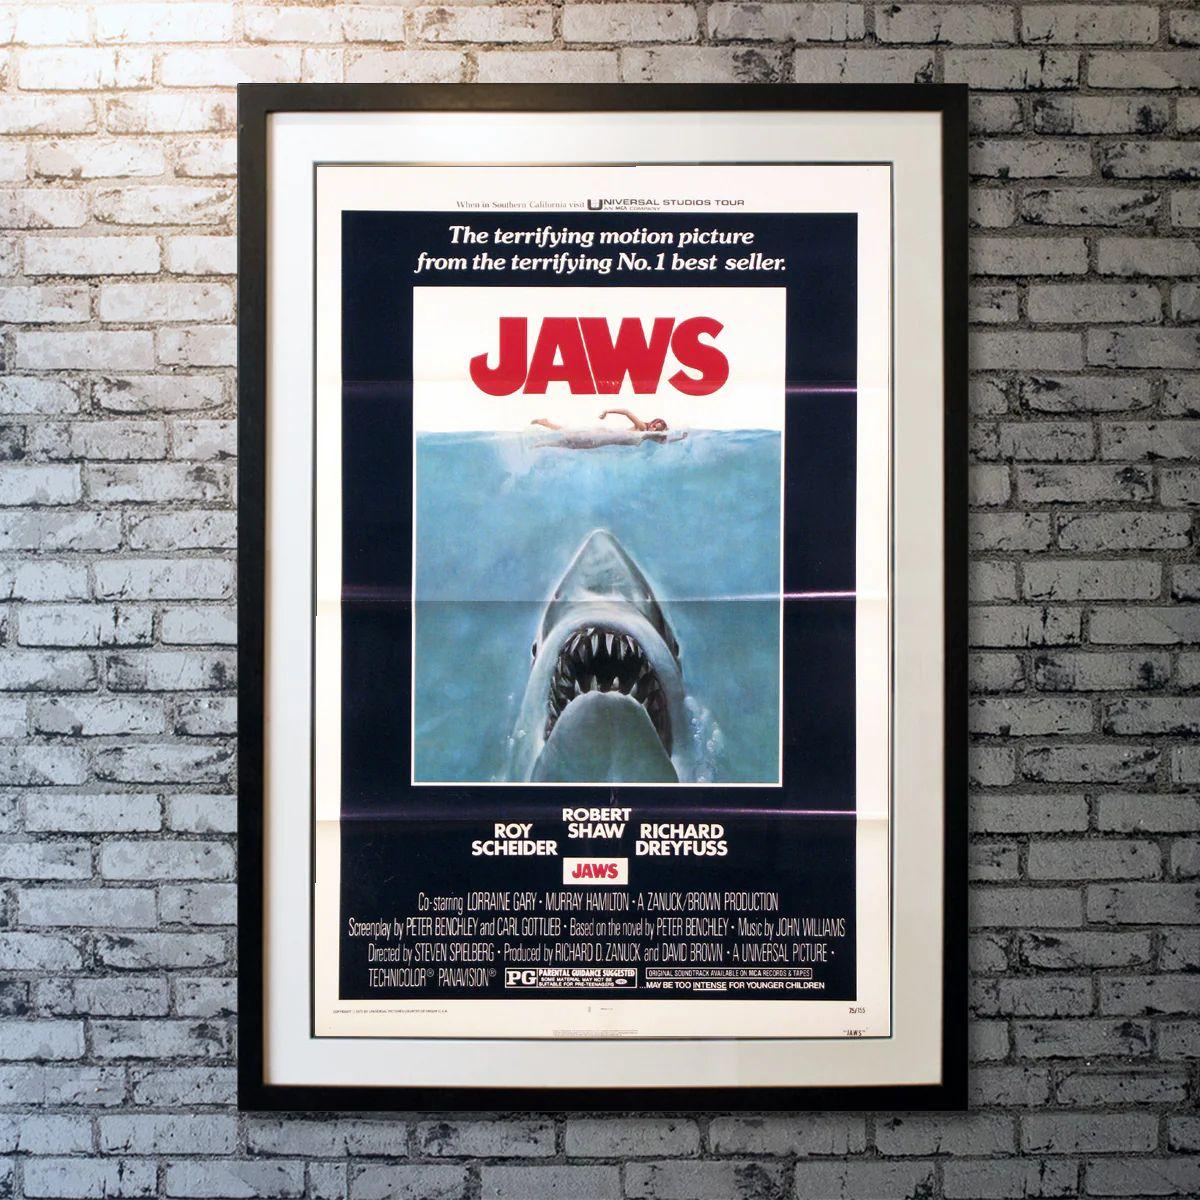 Jaws, Unframed Poster, 1975 *Tri-Folded*

Original One Sheet (27 X 41 Inches). When a killer shark unleashes chaos on a beach community off Cape Cod, it's up to a local sheriff, a marine biologist, and an old seafarer to hunt the beast down.

This